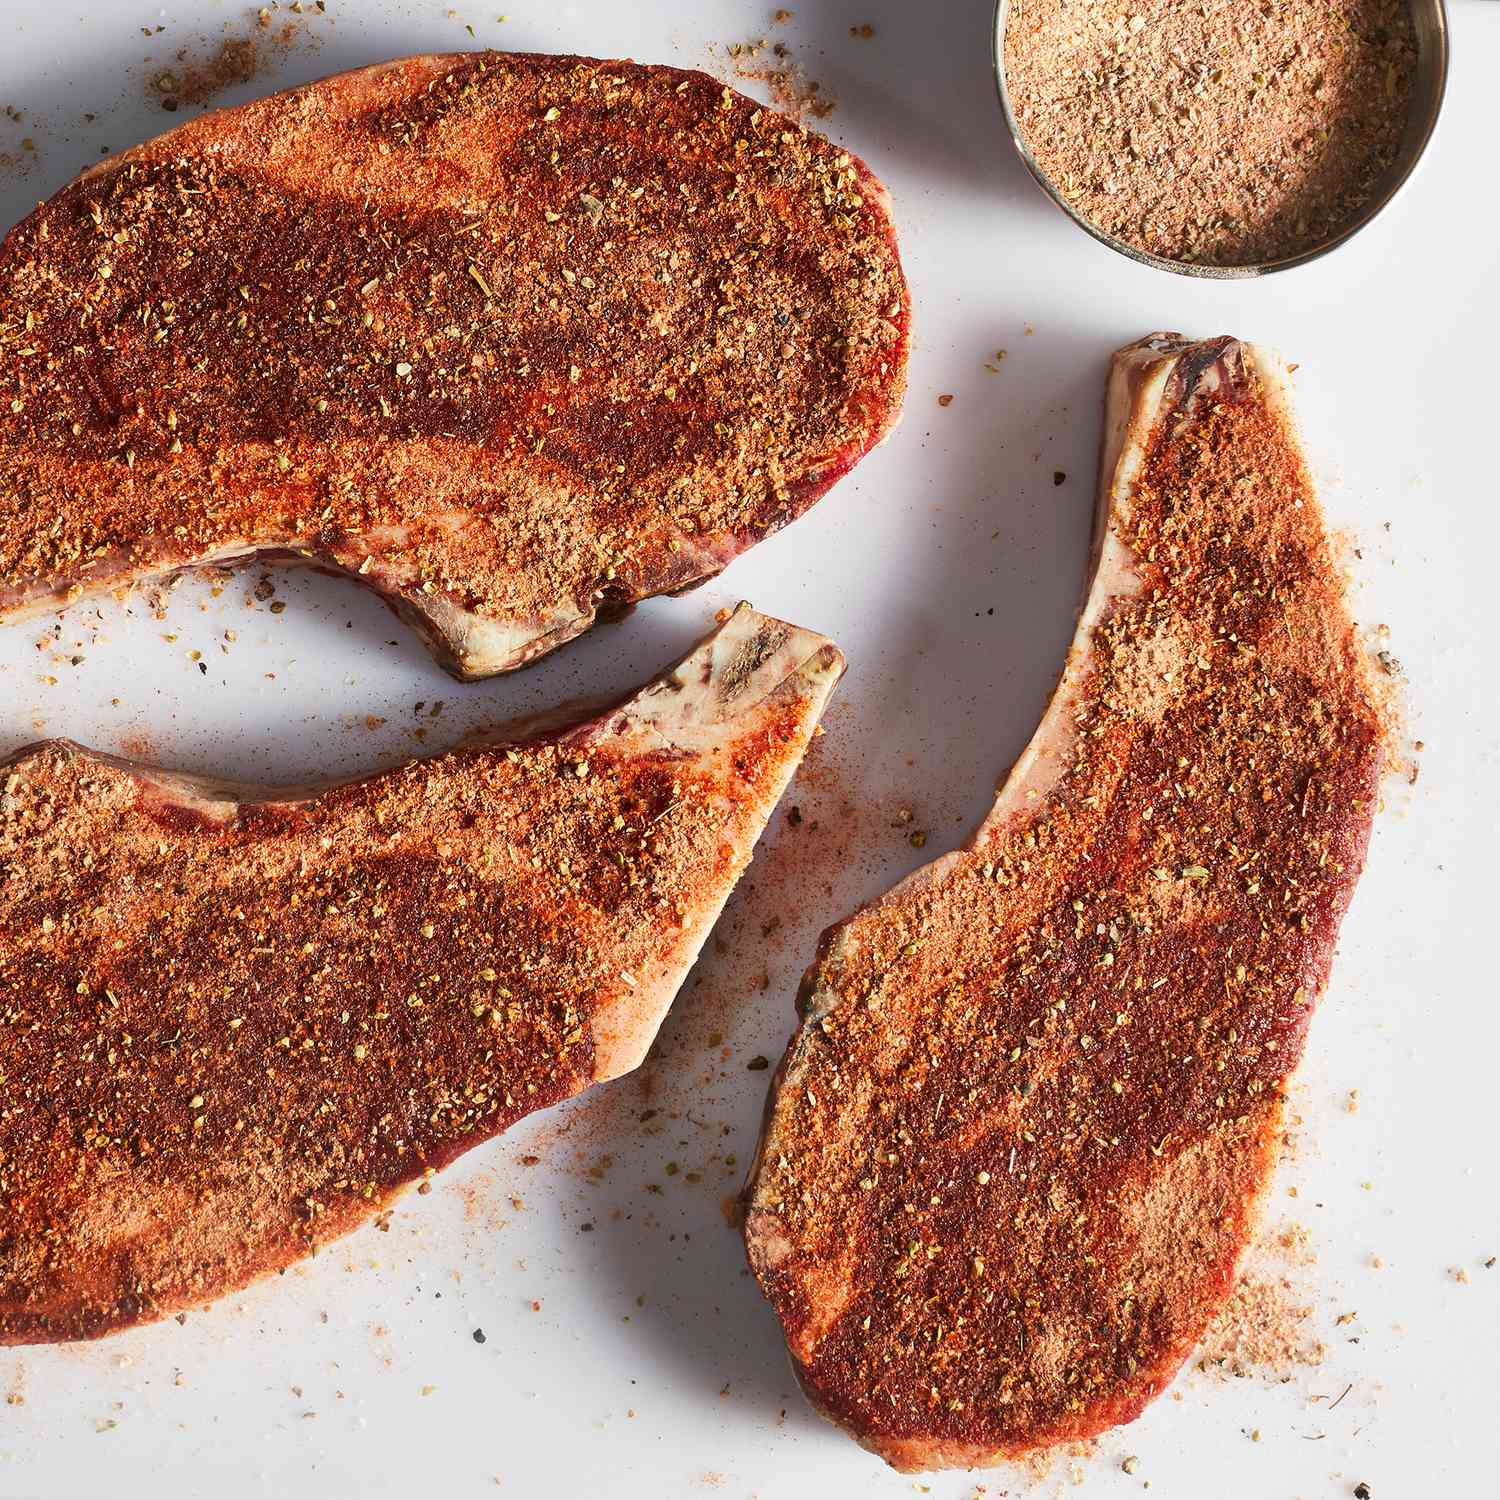 an overhead view of three raw steaks well seasoned with a dry rub mix of herbs and spices.